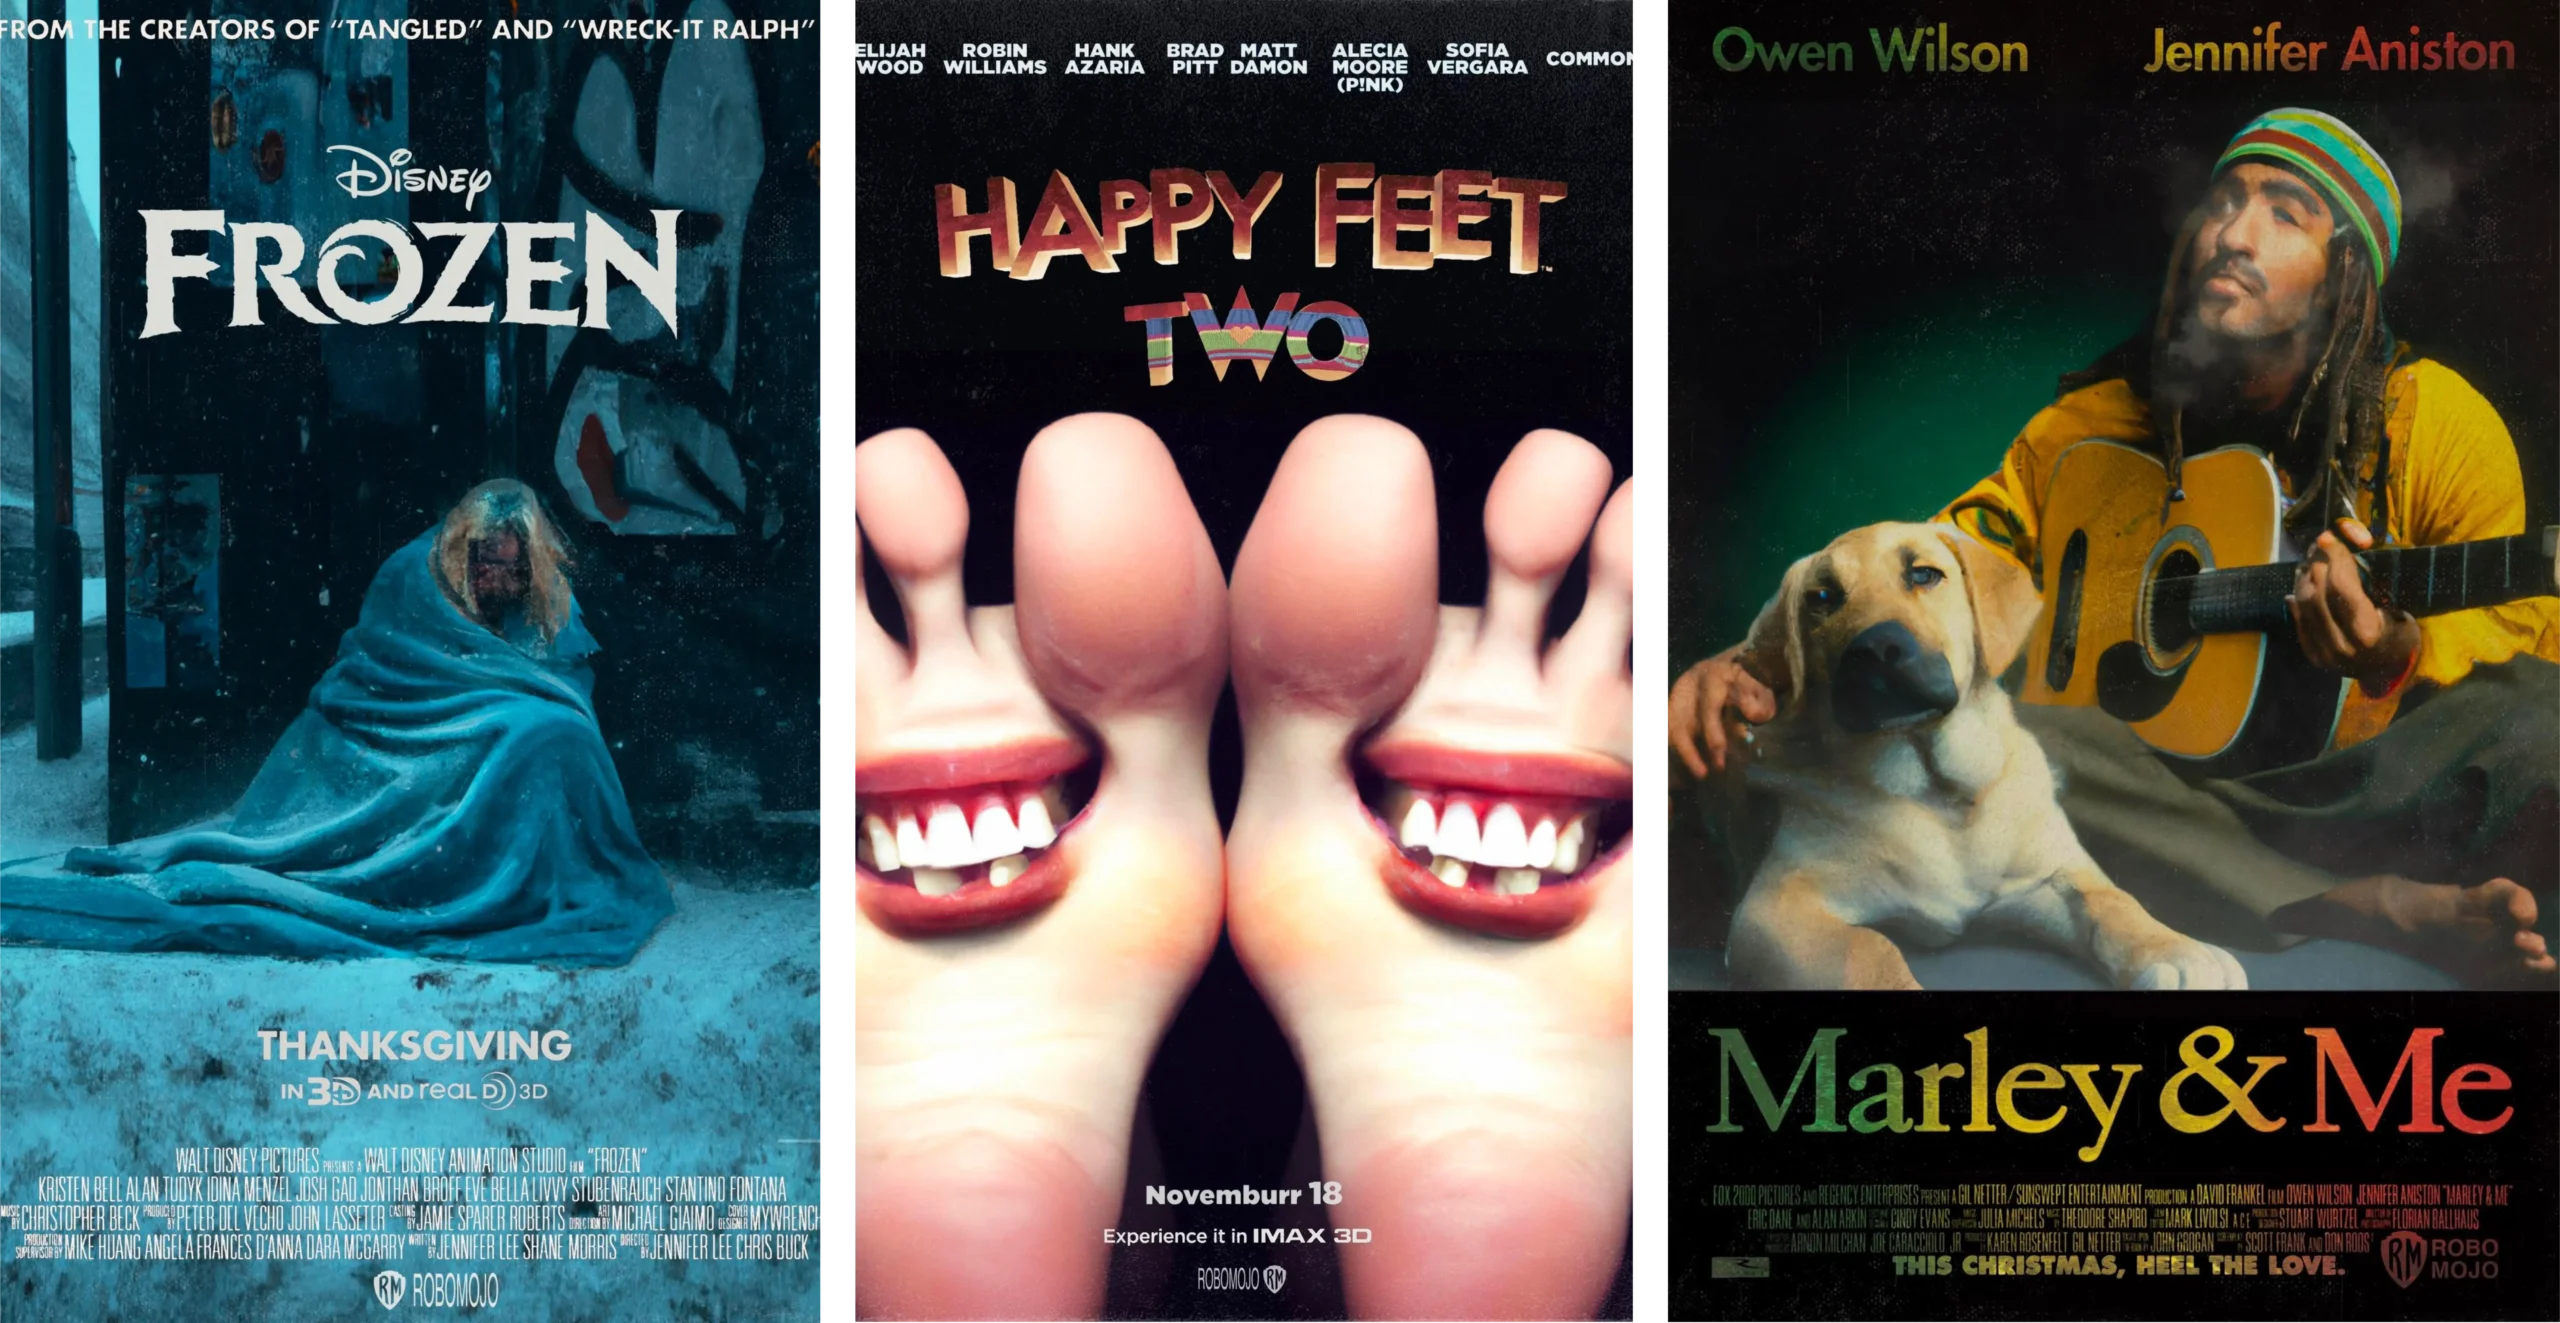 Film poster examples created by AI